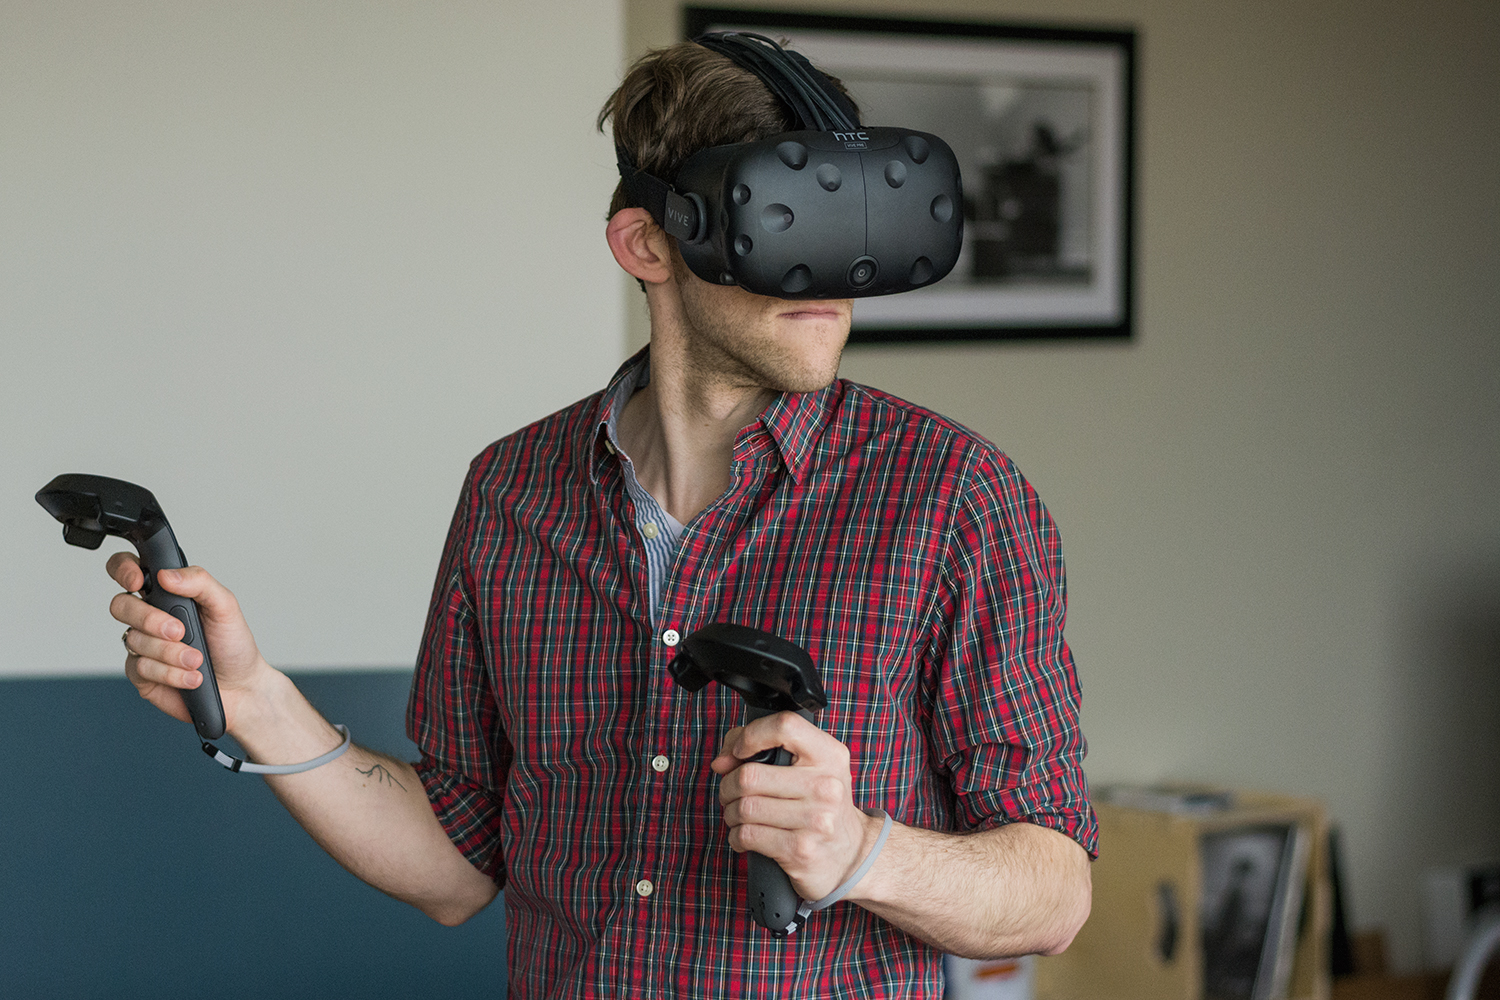 getty images vr stock photography steam is the killer app